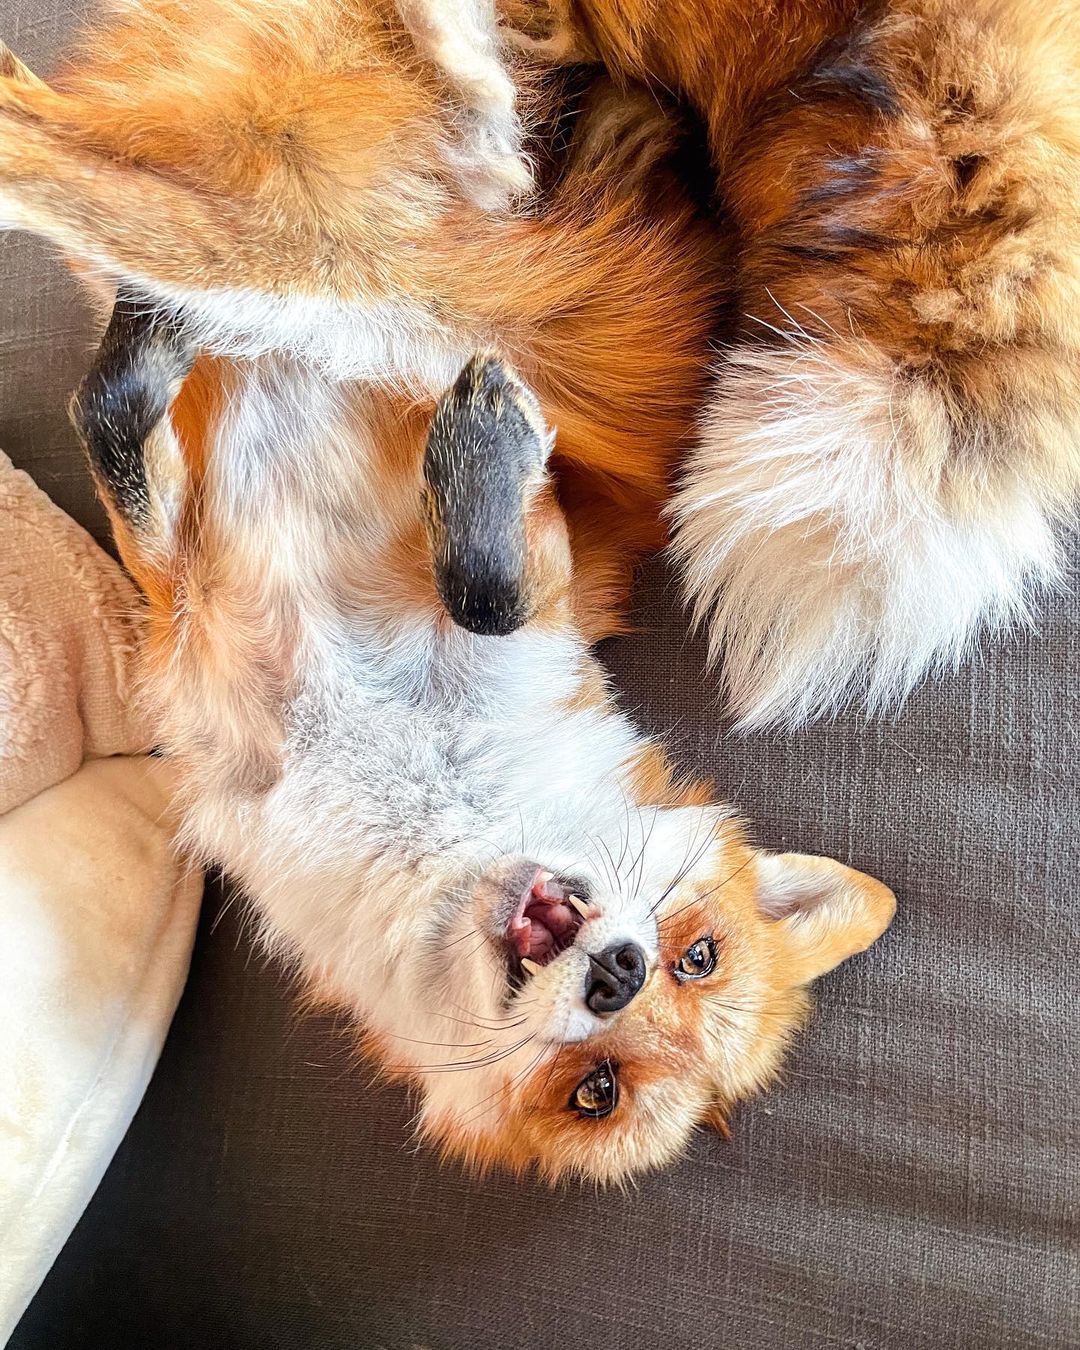 Juniper lives with other animals such as dogs, snakes and raccoons at home in the United States (Instagram @juniperfoxx)